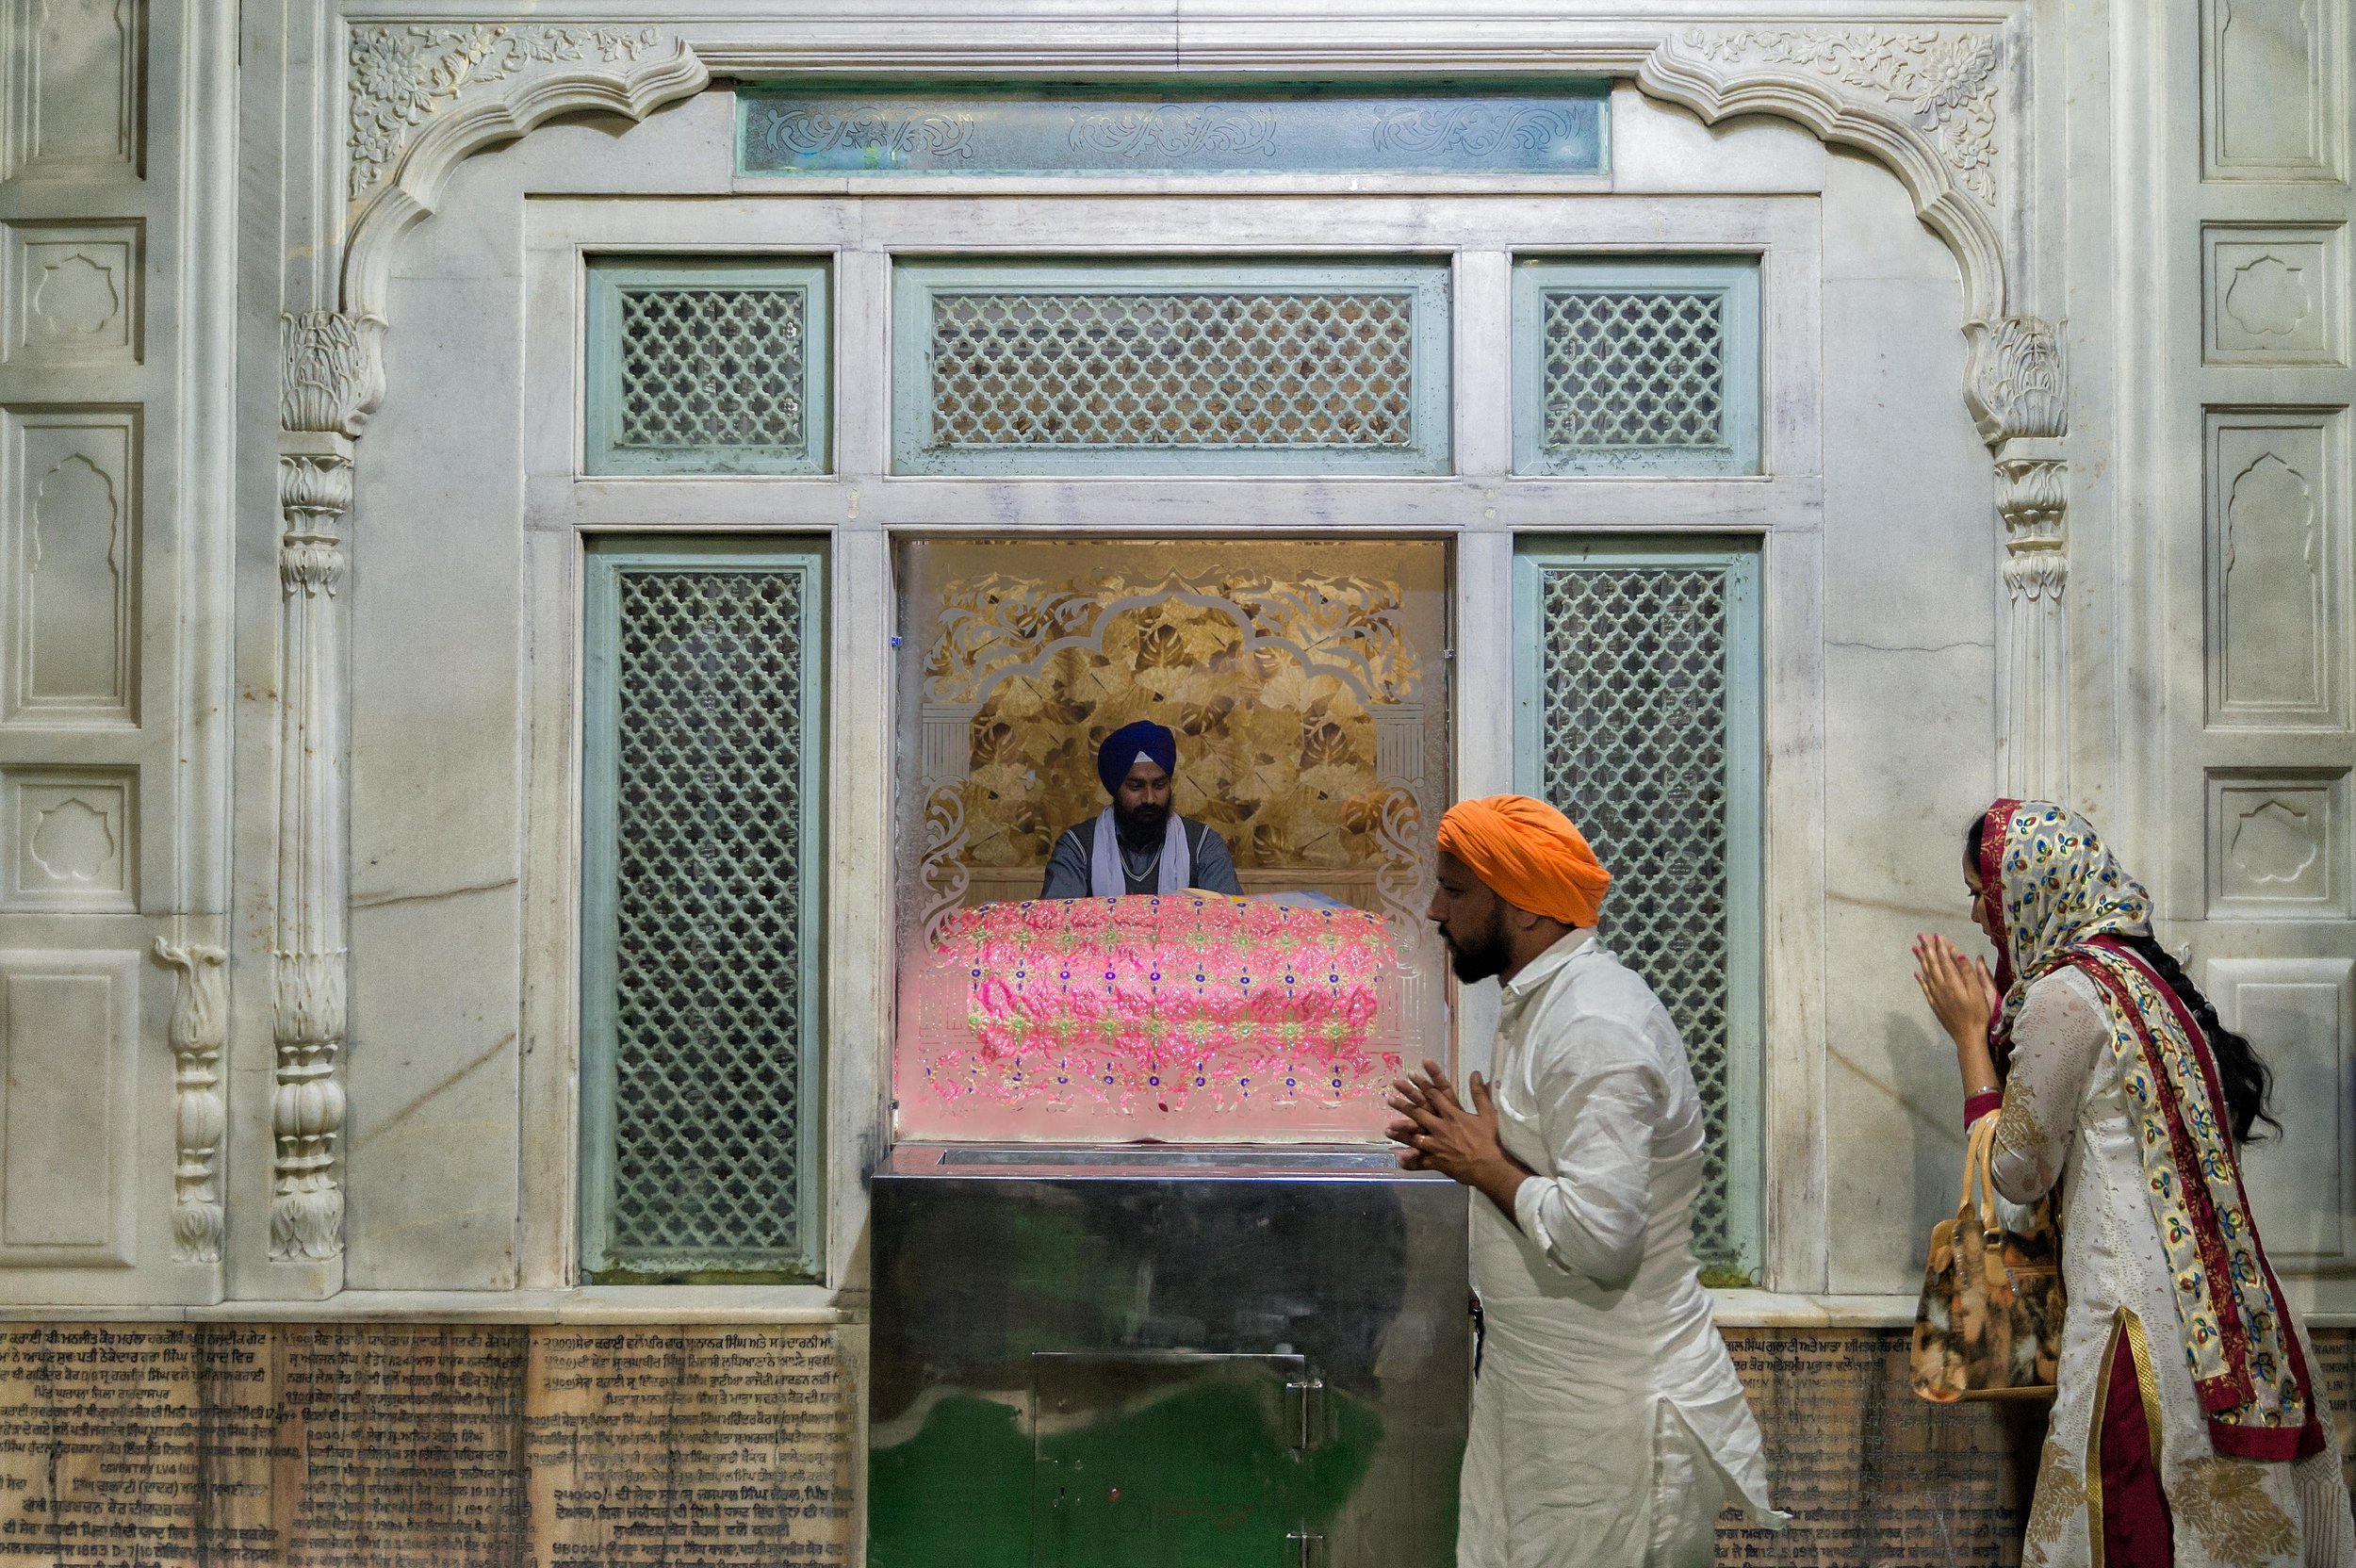  If i am not mistaken and I do believe that in the North, South, East &amp; West side of the Golden Temple are small cubicles like this where priests would go at every part of the day to read the text from the Holy Book. 